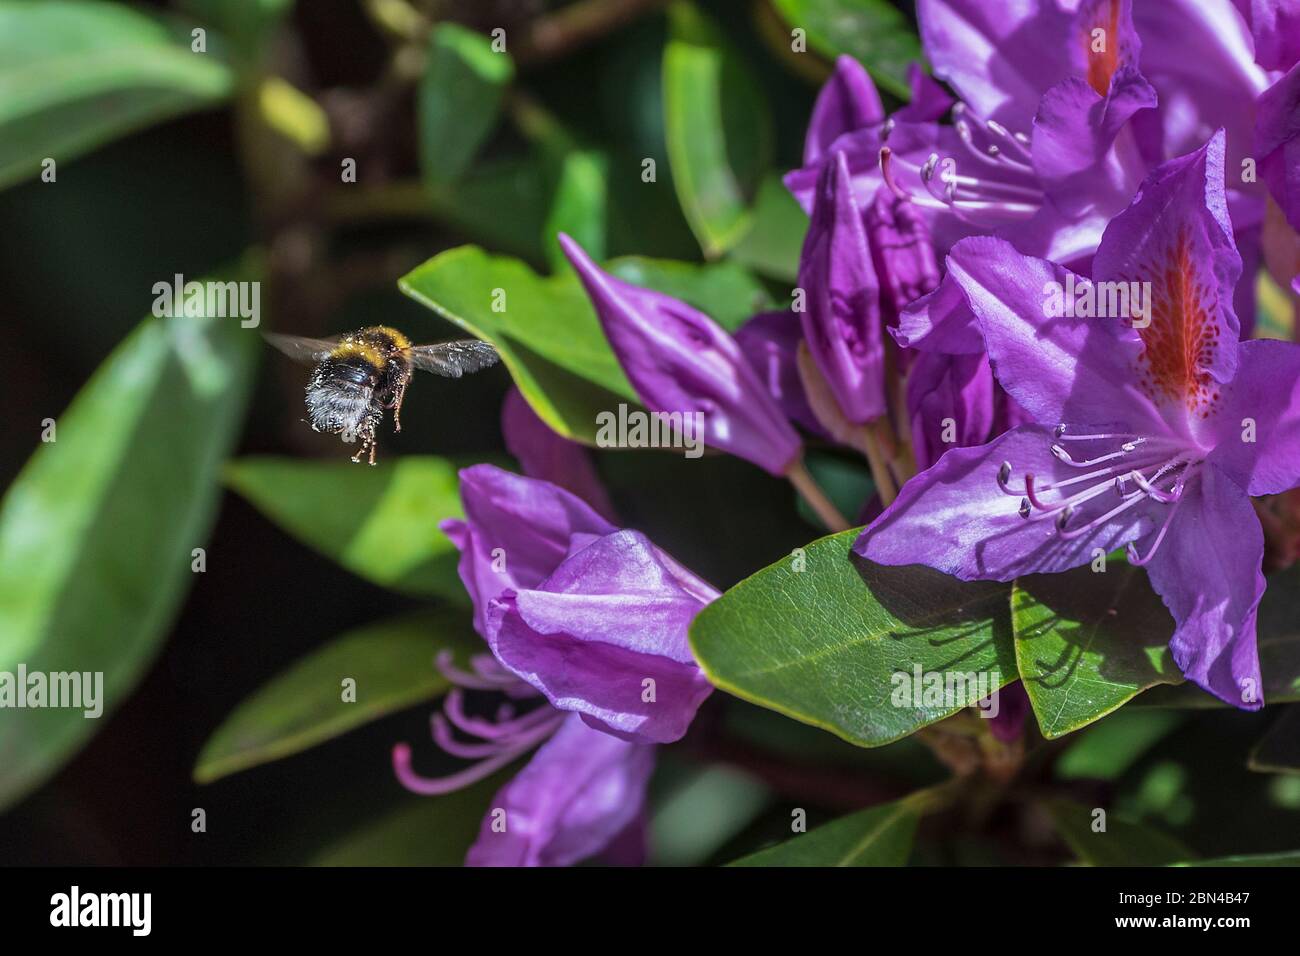 Bumblebee on rhododendron flowers. Stock Photo